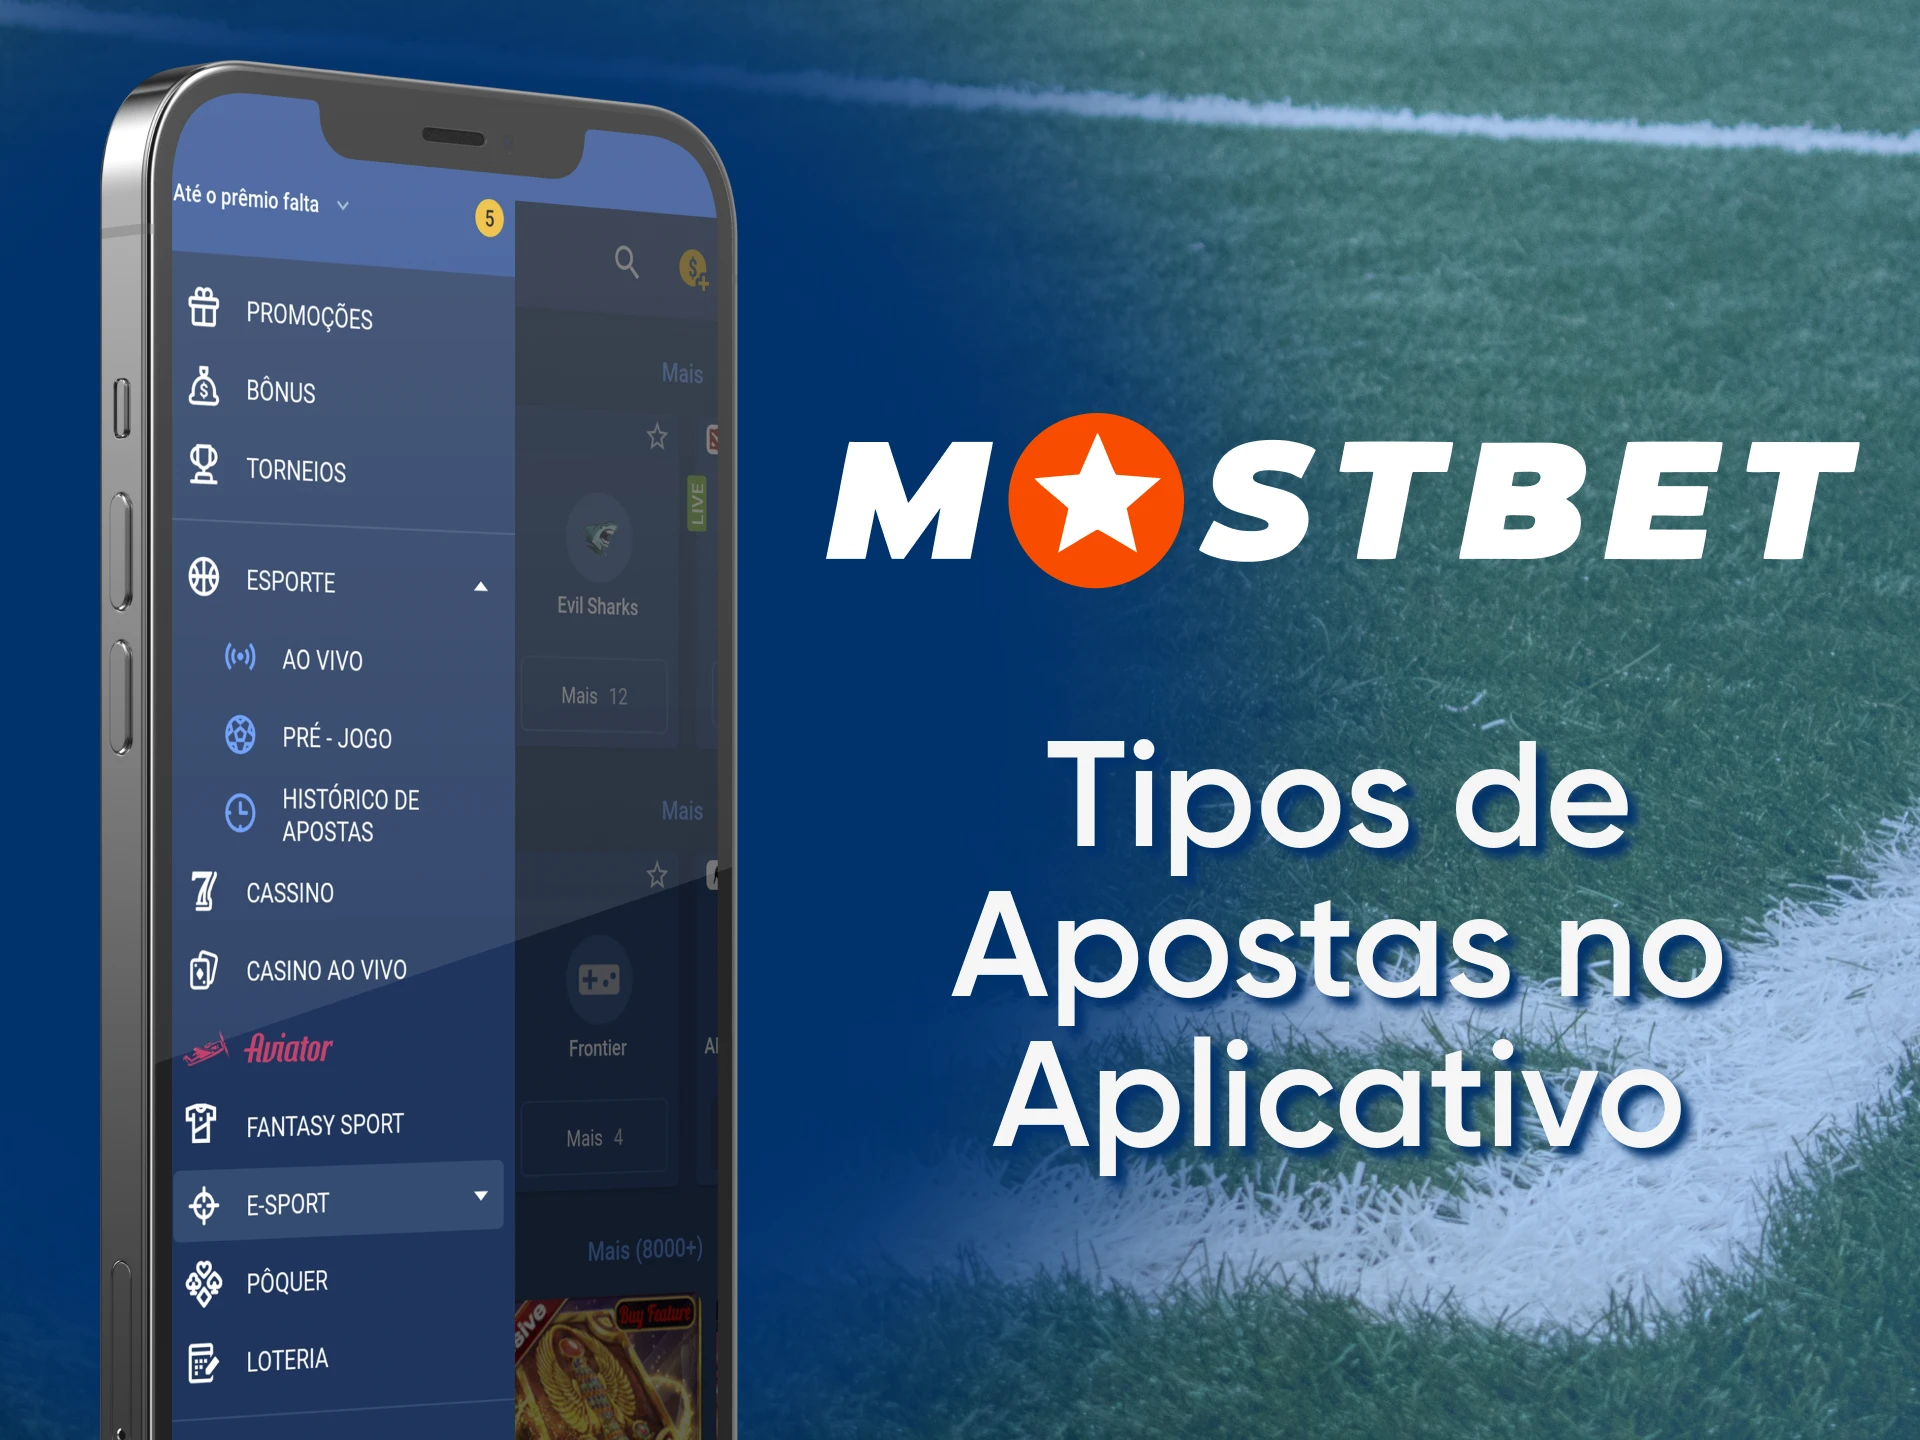 Take The Stress Out Of Mostbet-AZ91 bookmaker and casino in Azerbaijan